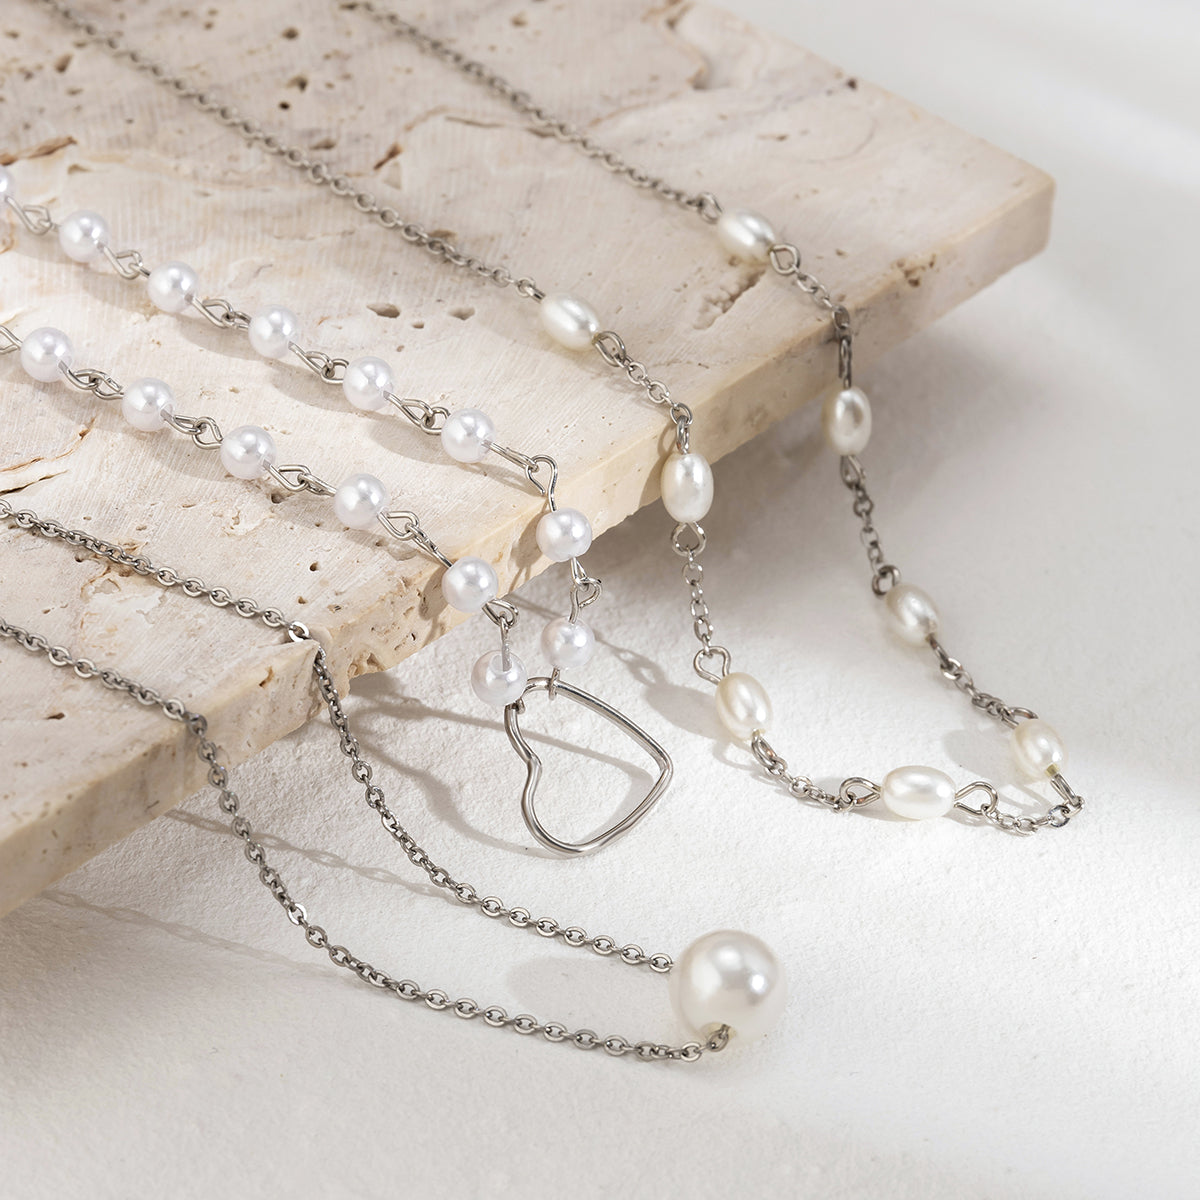 Pearl & Silver-Plated Heart Pendant Necklace Set